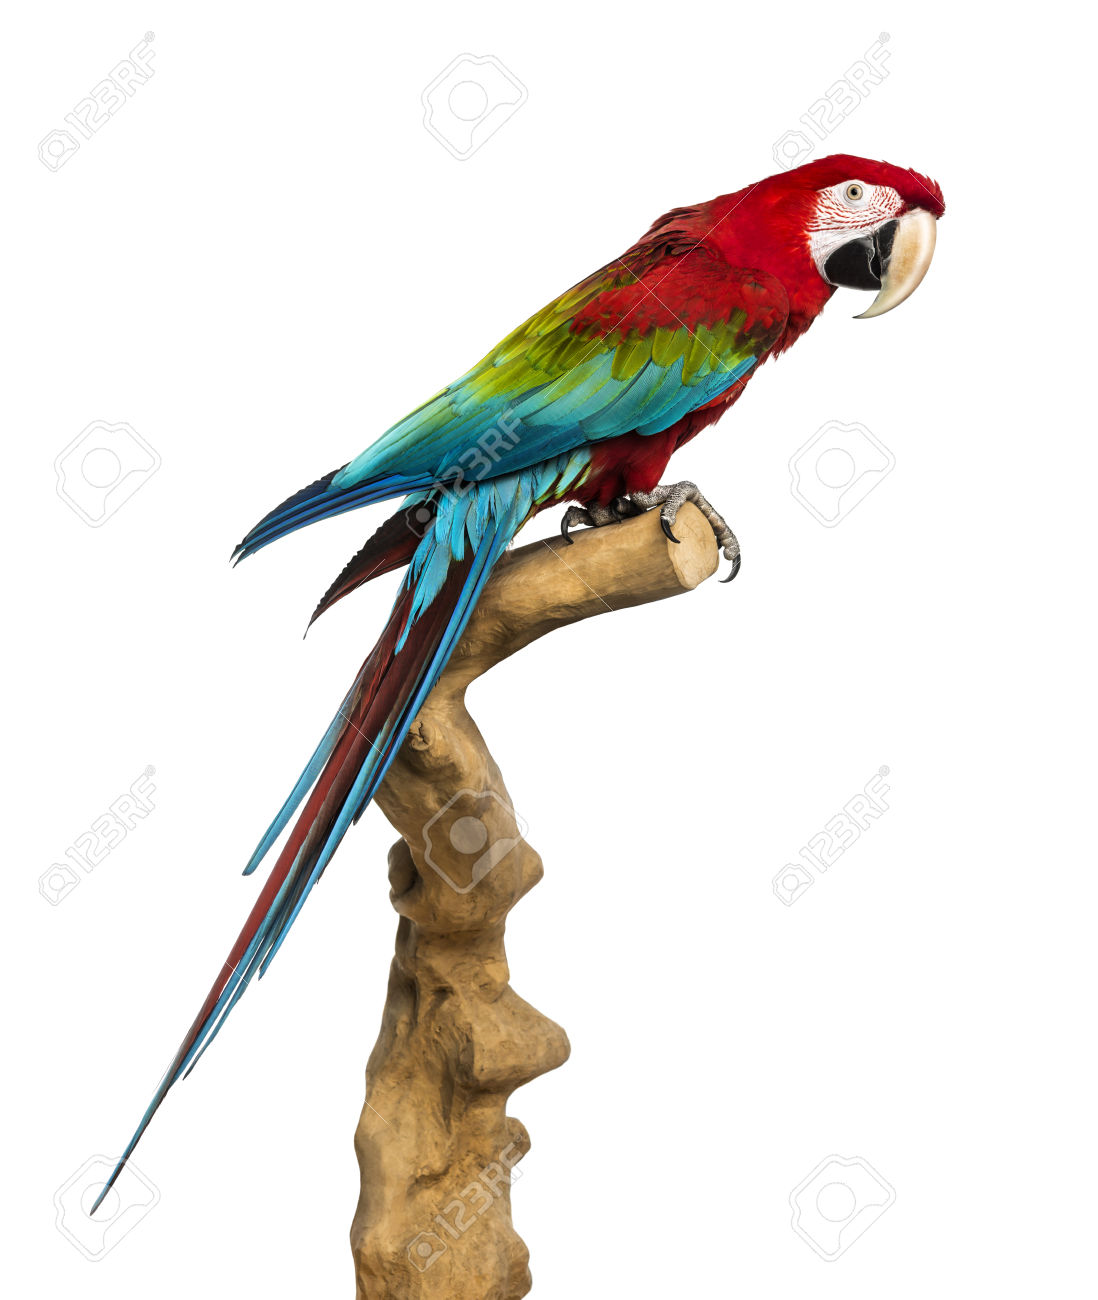 Red-and-green Macaw #21